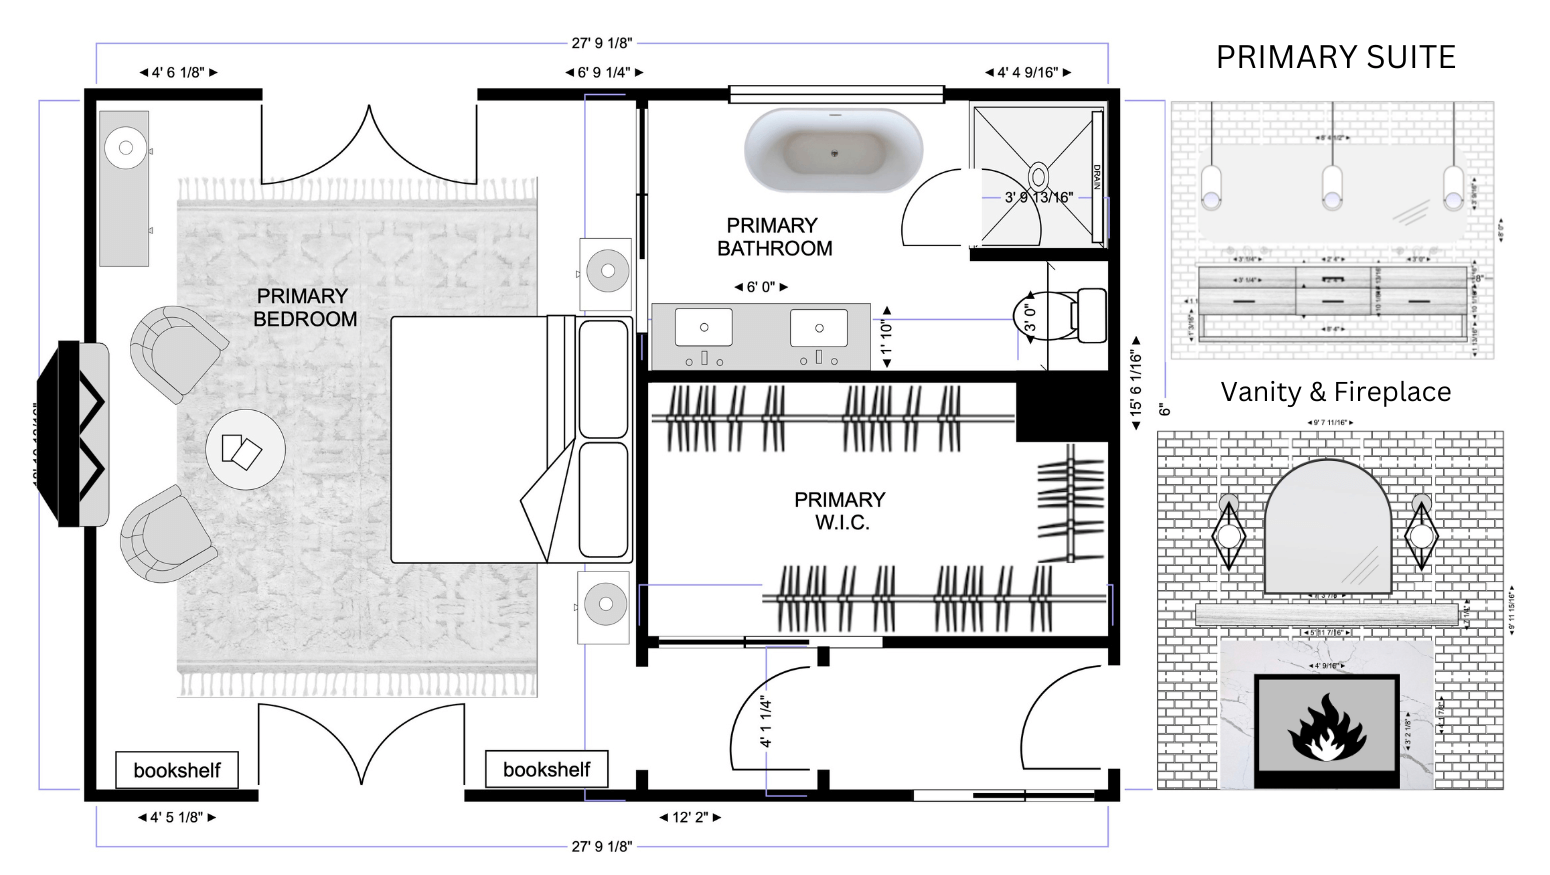 4. Floor and Space Planning